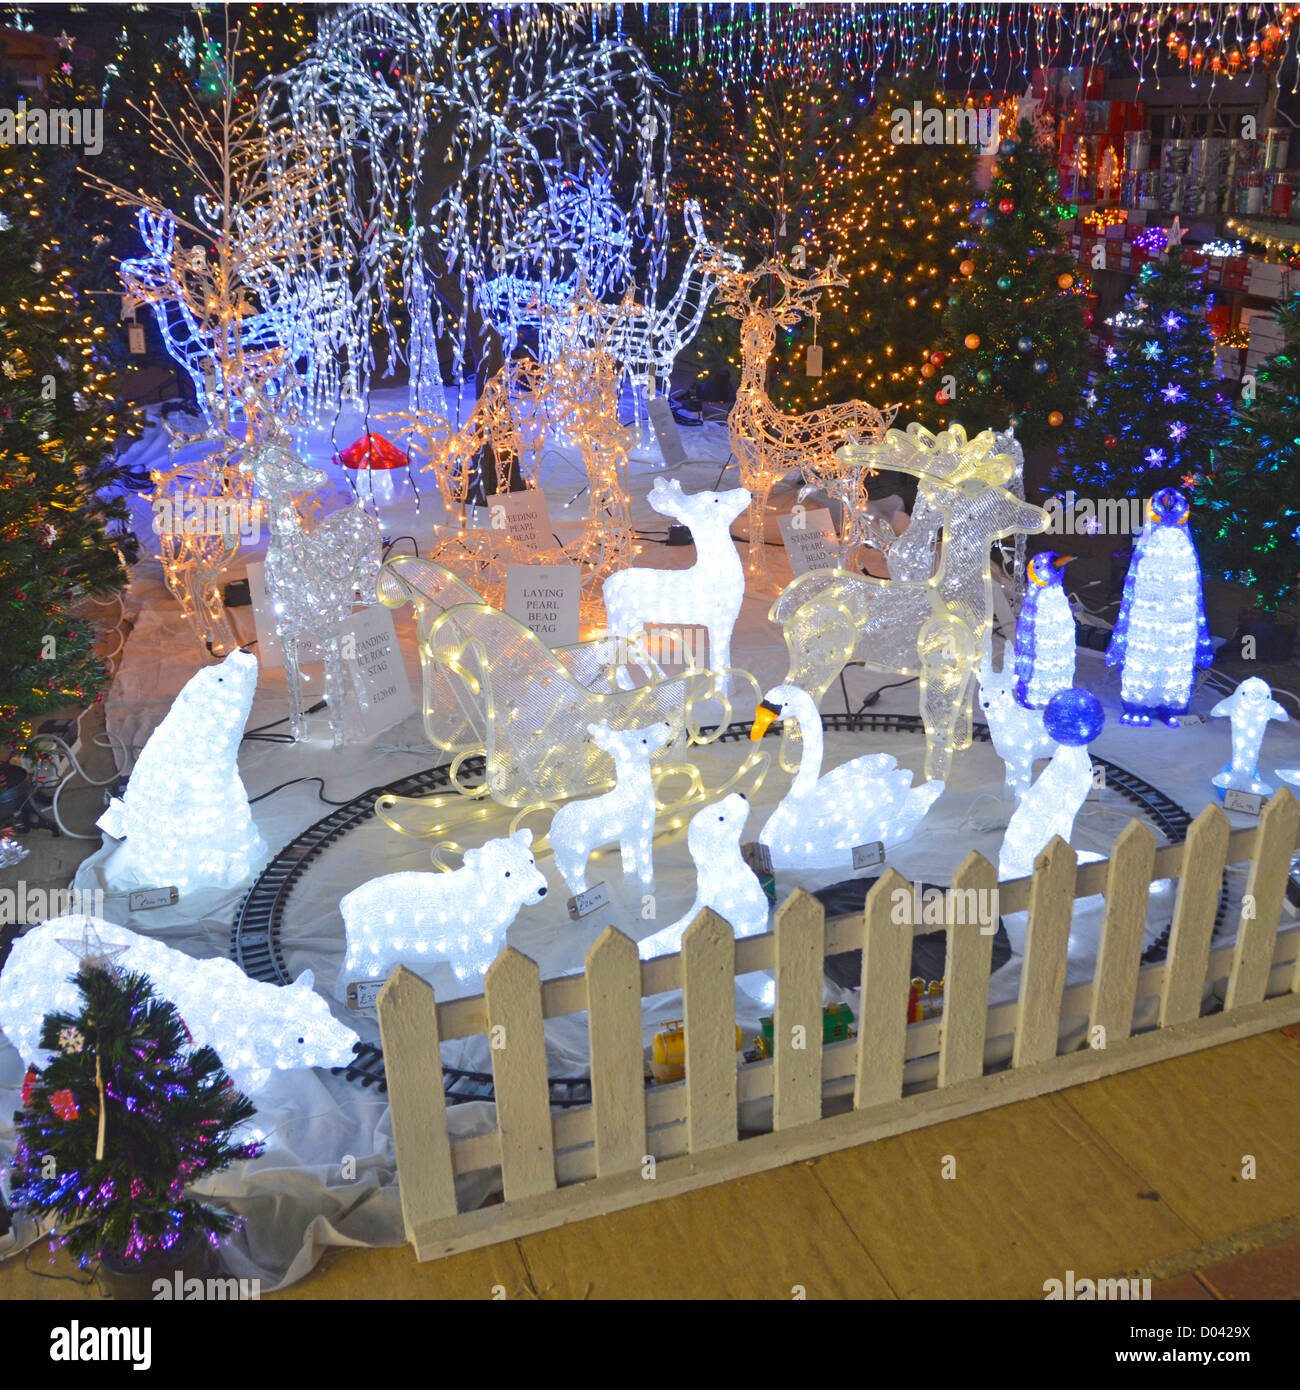 Display of illuminated Christmas trees & decorations on sale in a garden centre store Essex England UK Stock Photo